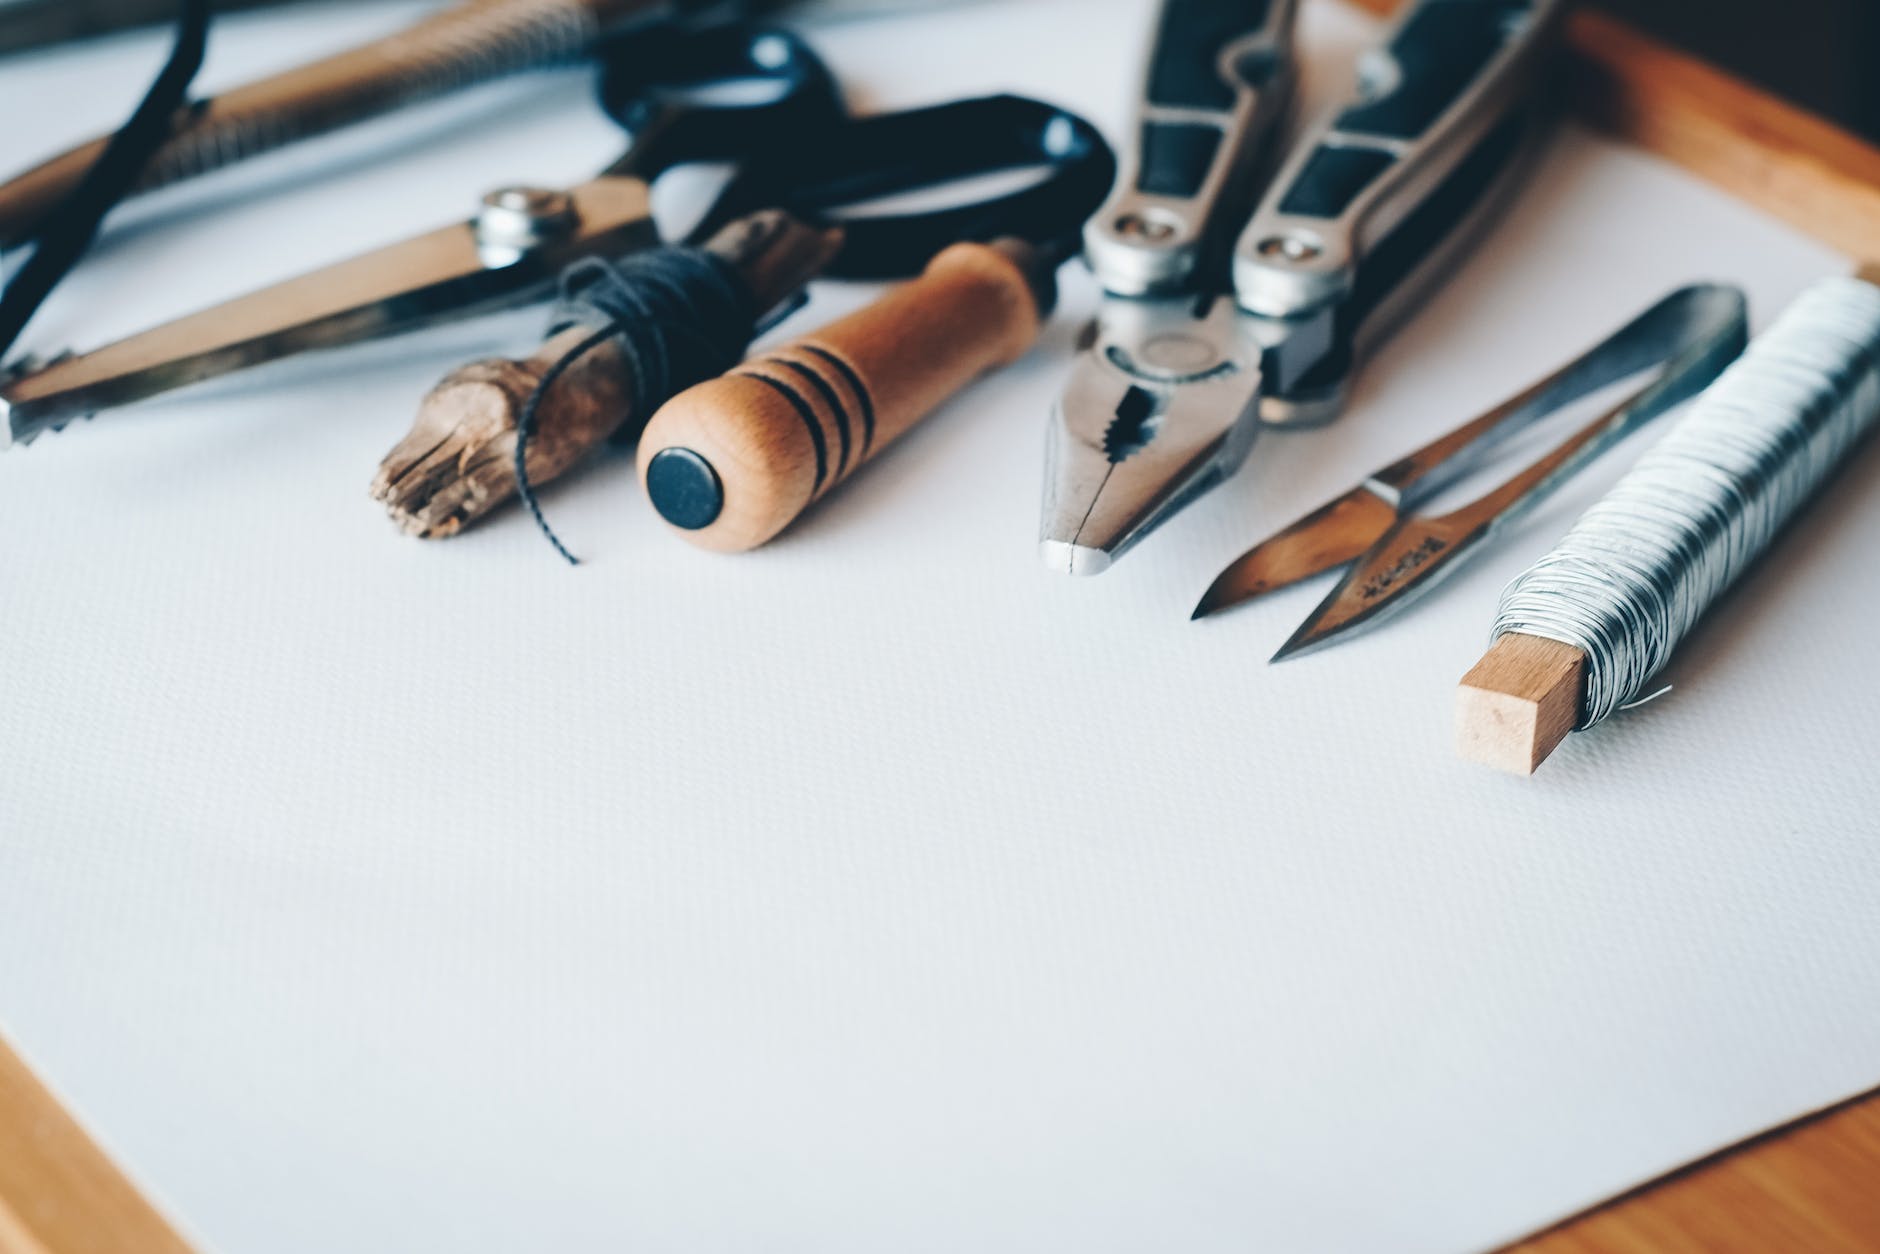 DIY Pyrography Equipment: Creating Your Own Wood Burning Tools